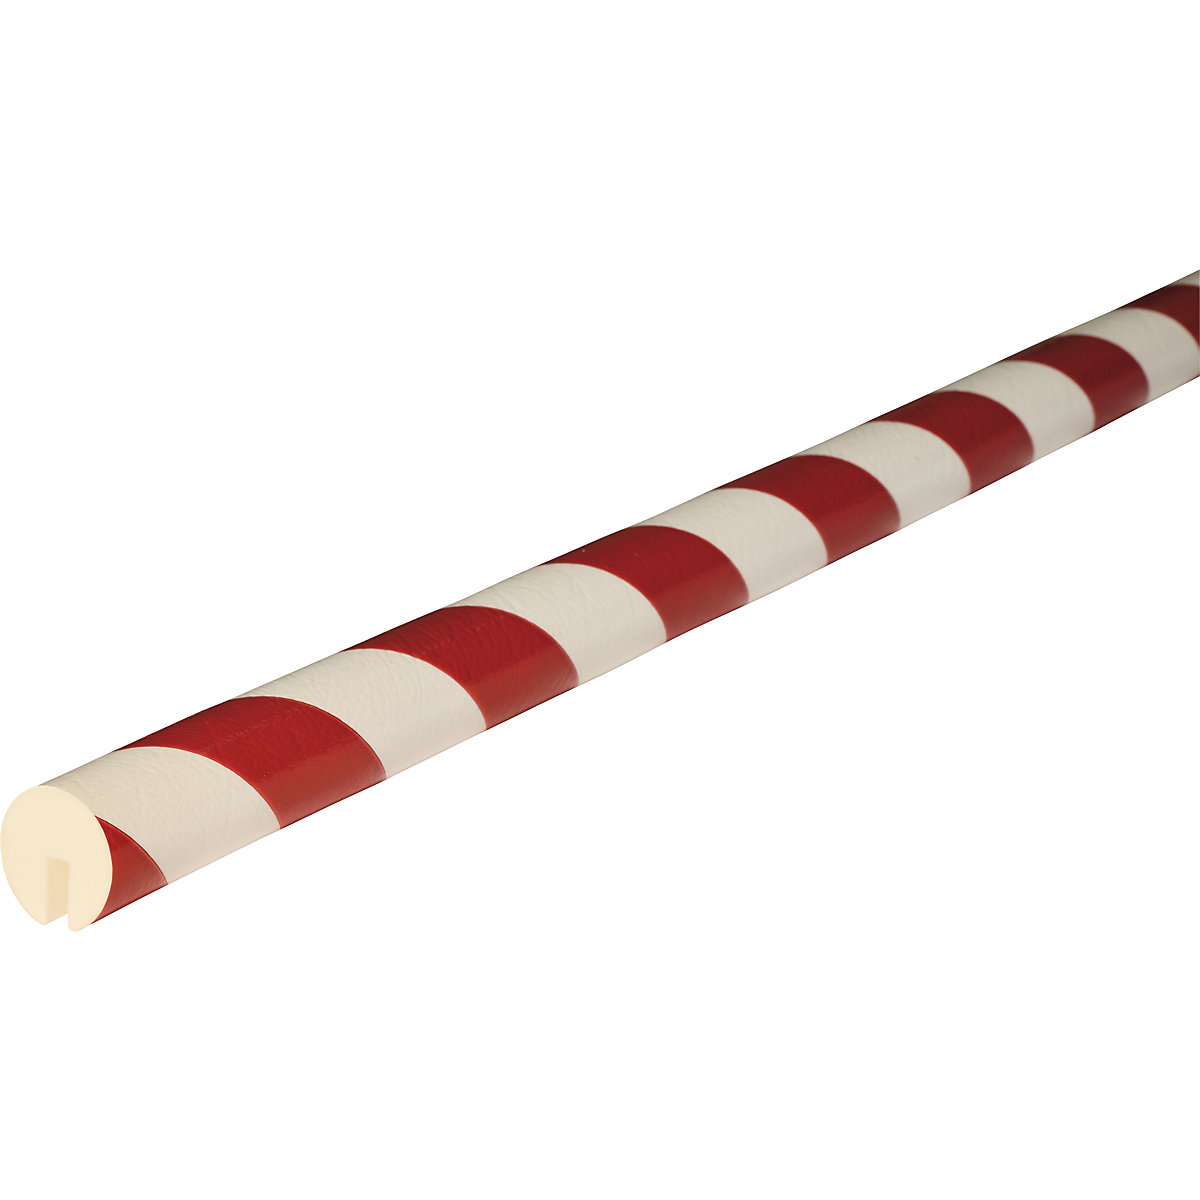 Knuffi® edge protection – SHG, type B, 1 x 5 m roll, red / white-22